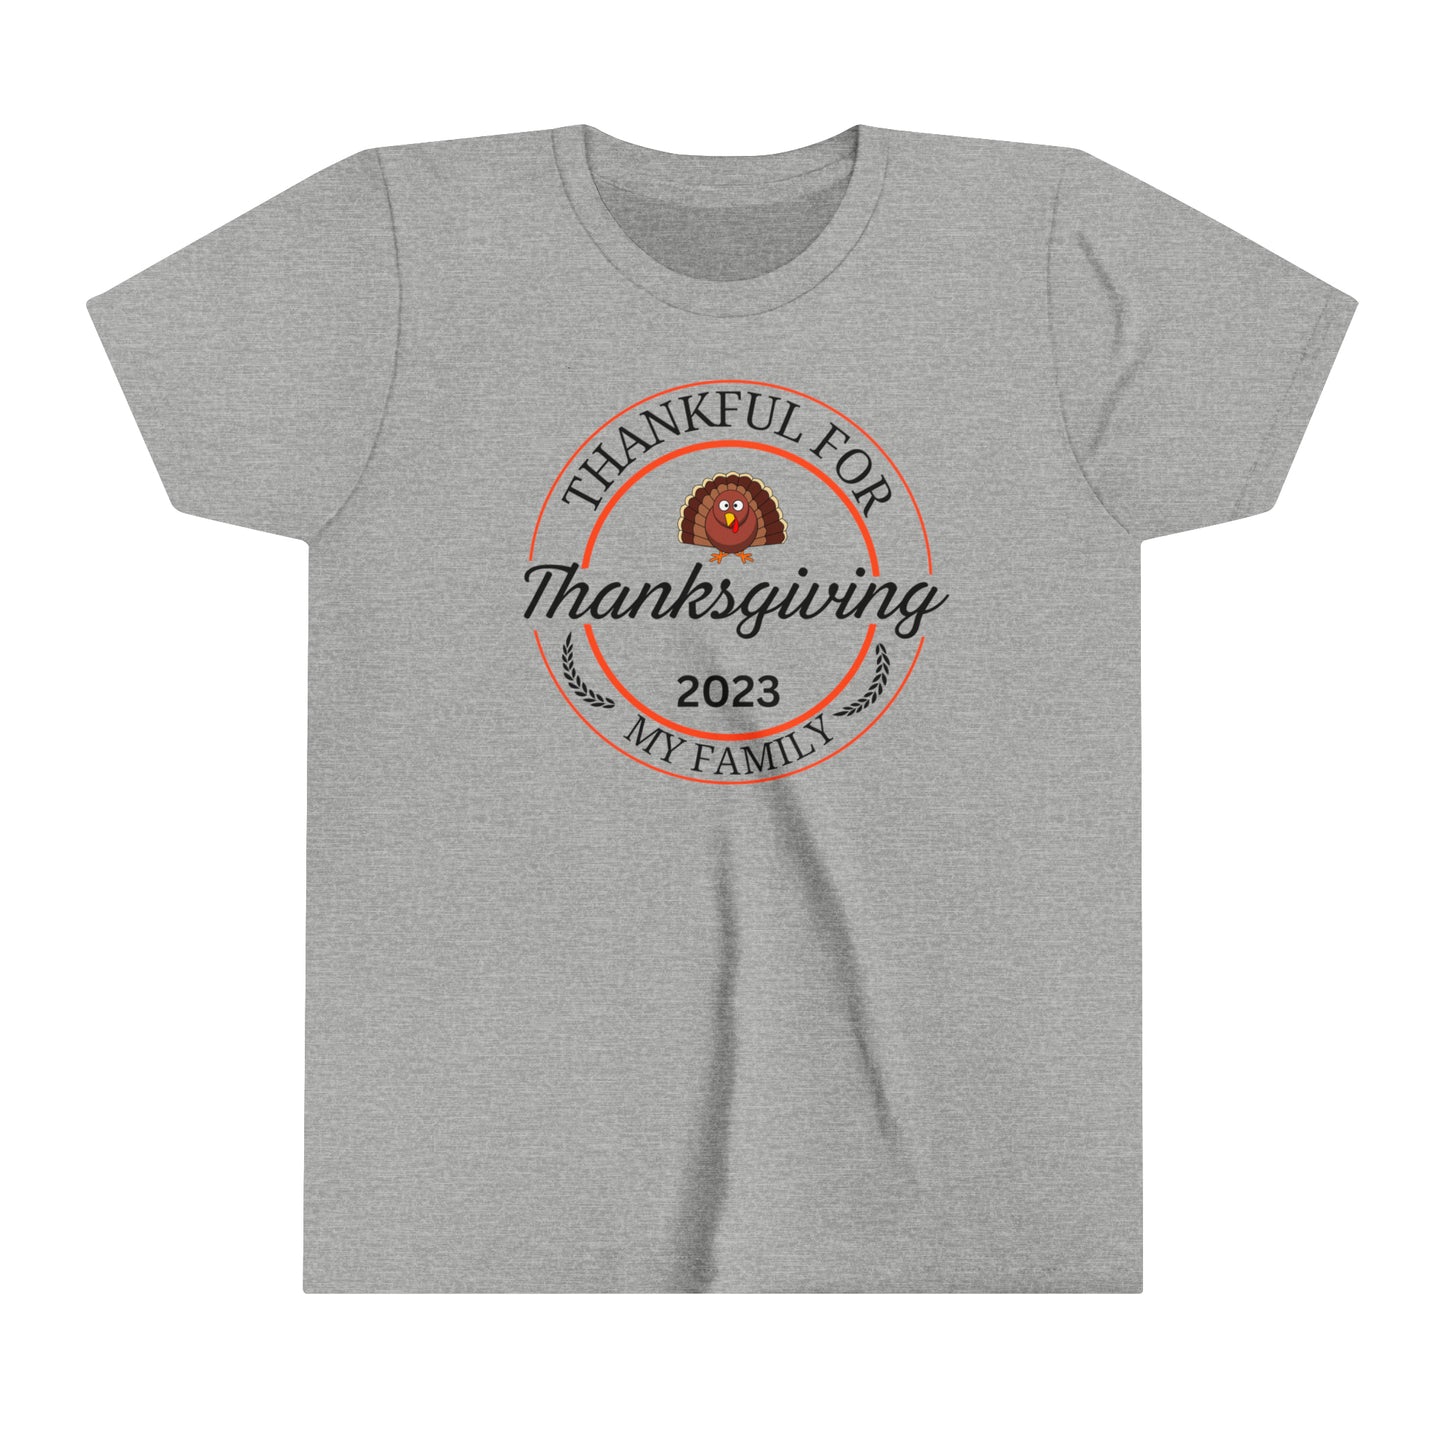 Youth - Thankful Group Thanksgiving 2023 Shirts, Family T-shirt, Friend shirts, Youth Shirts, Thanksgiving Shirt for Kids